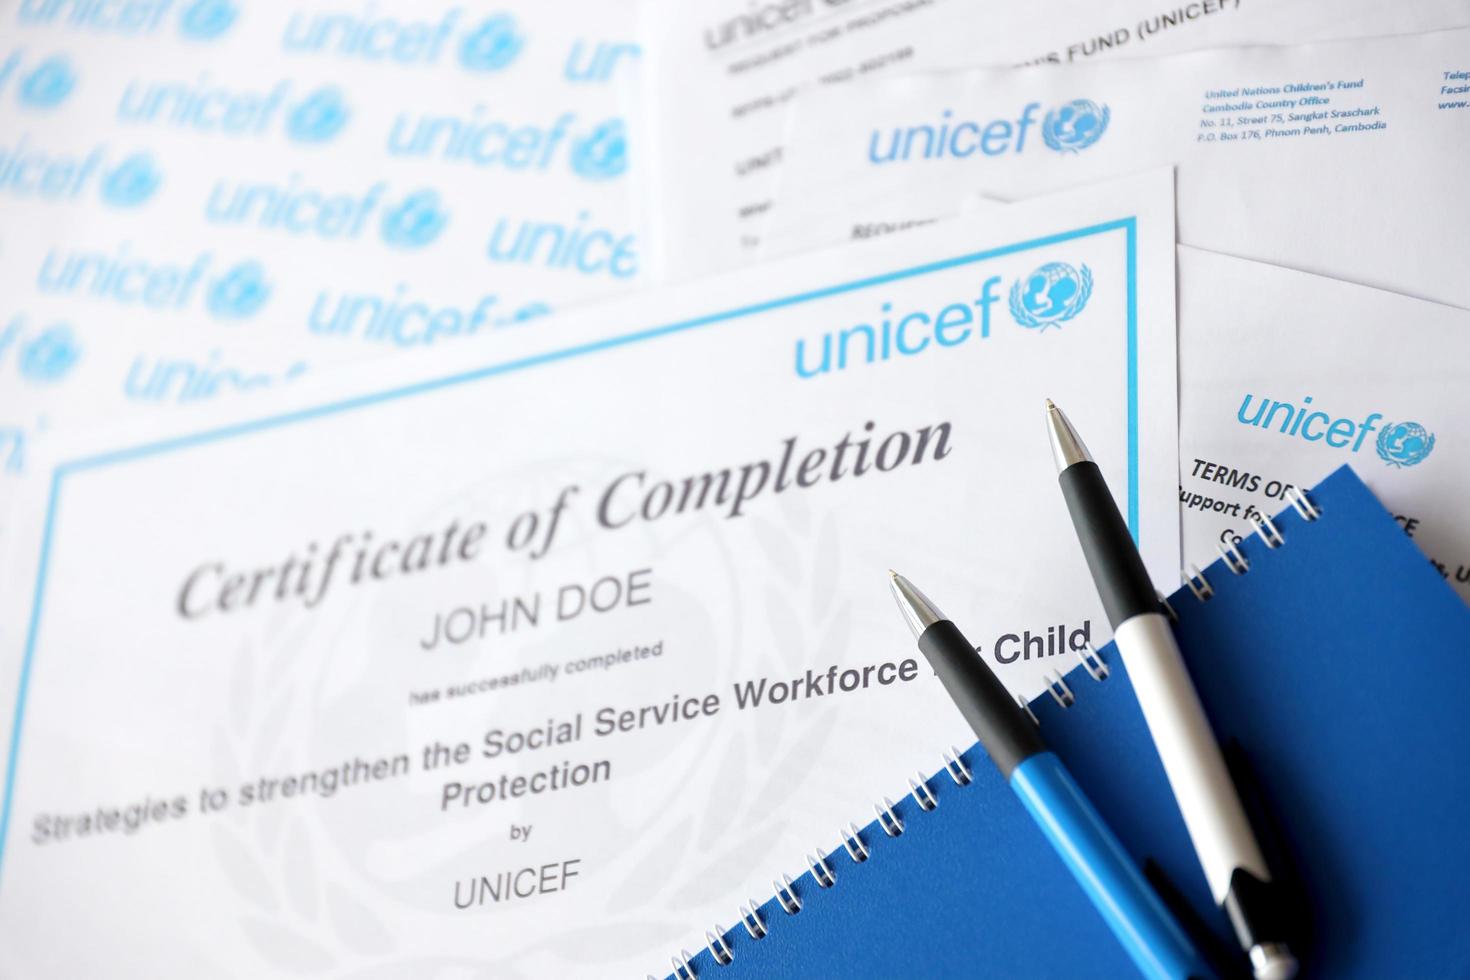 TERNOPIL, UKRAINE - MAY 2, 2022 Volunteer certificate of completion from UNICEF - United Nations programm that provides humanitarian and developmental assistance to children photo